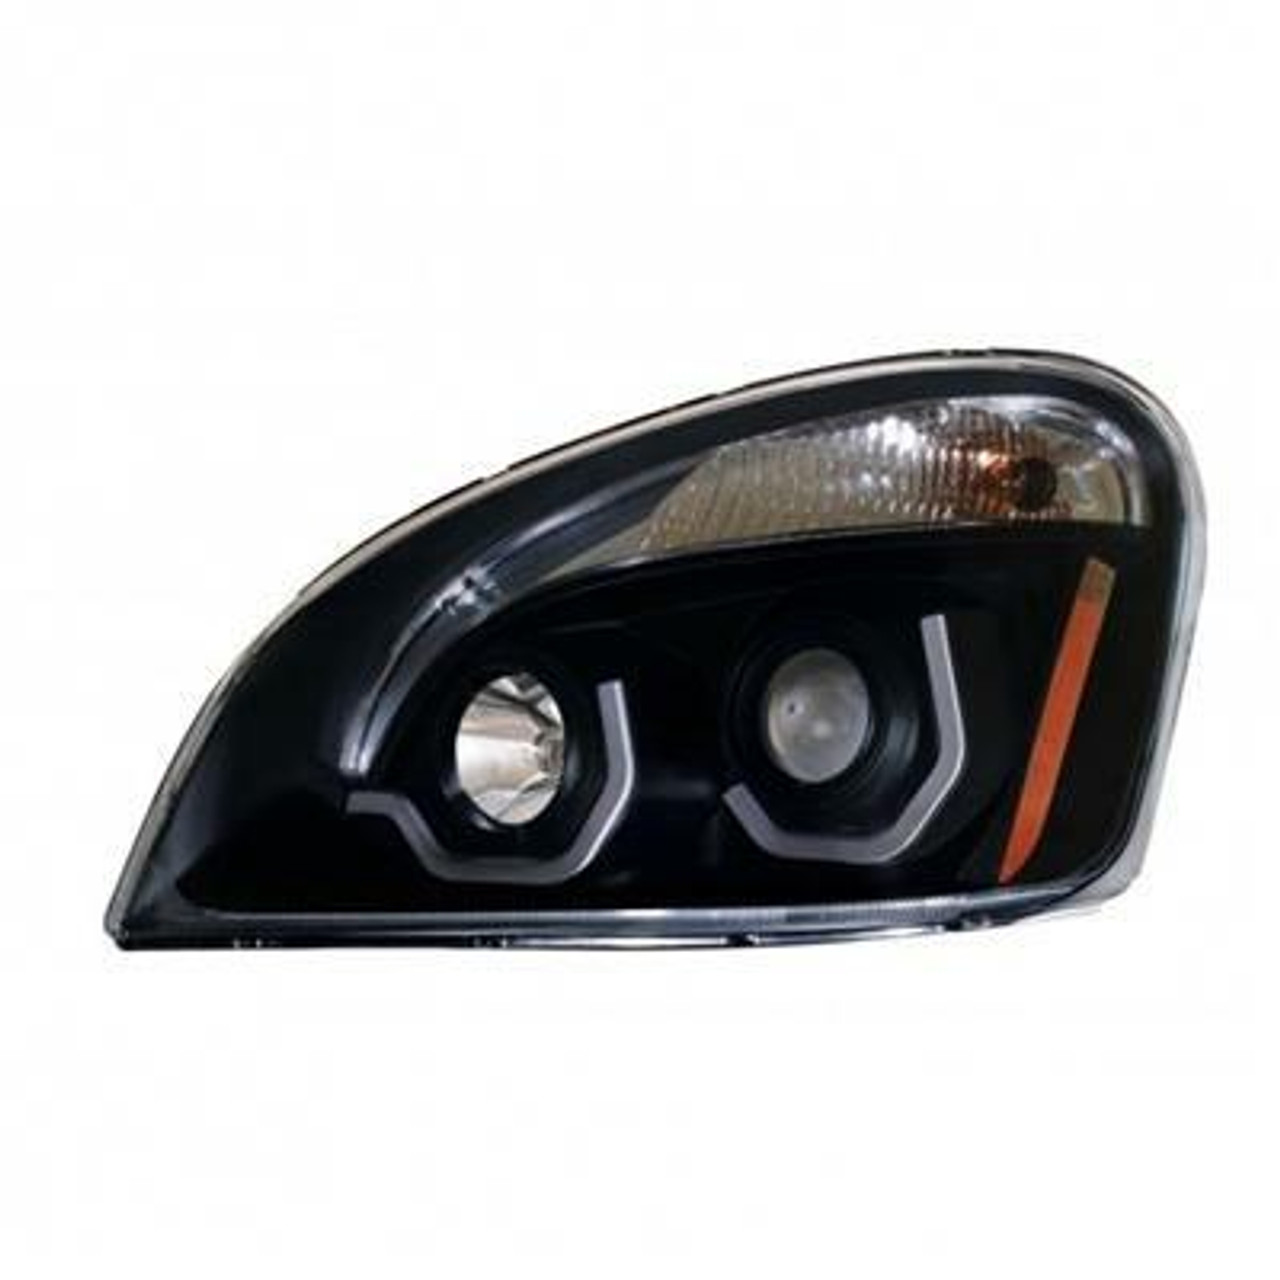 Blackout Projection Headlight With White LED Position Light For 2008-17 Freightliner Cascadia - passenger